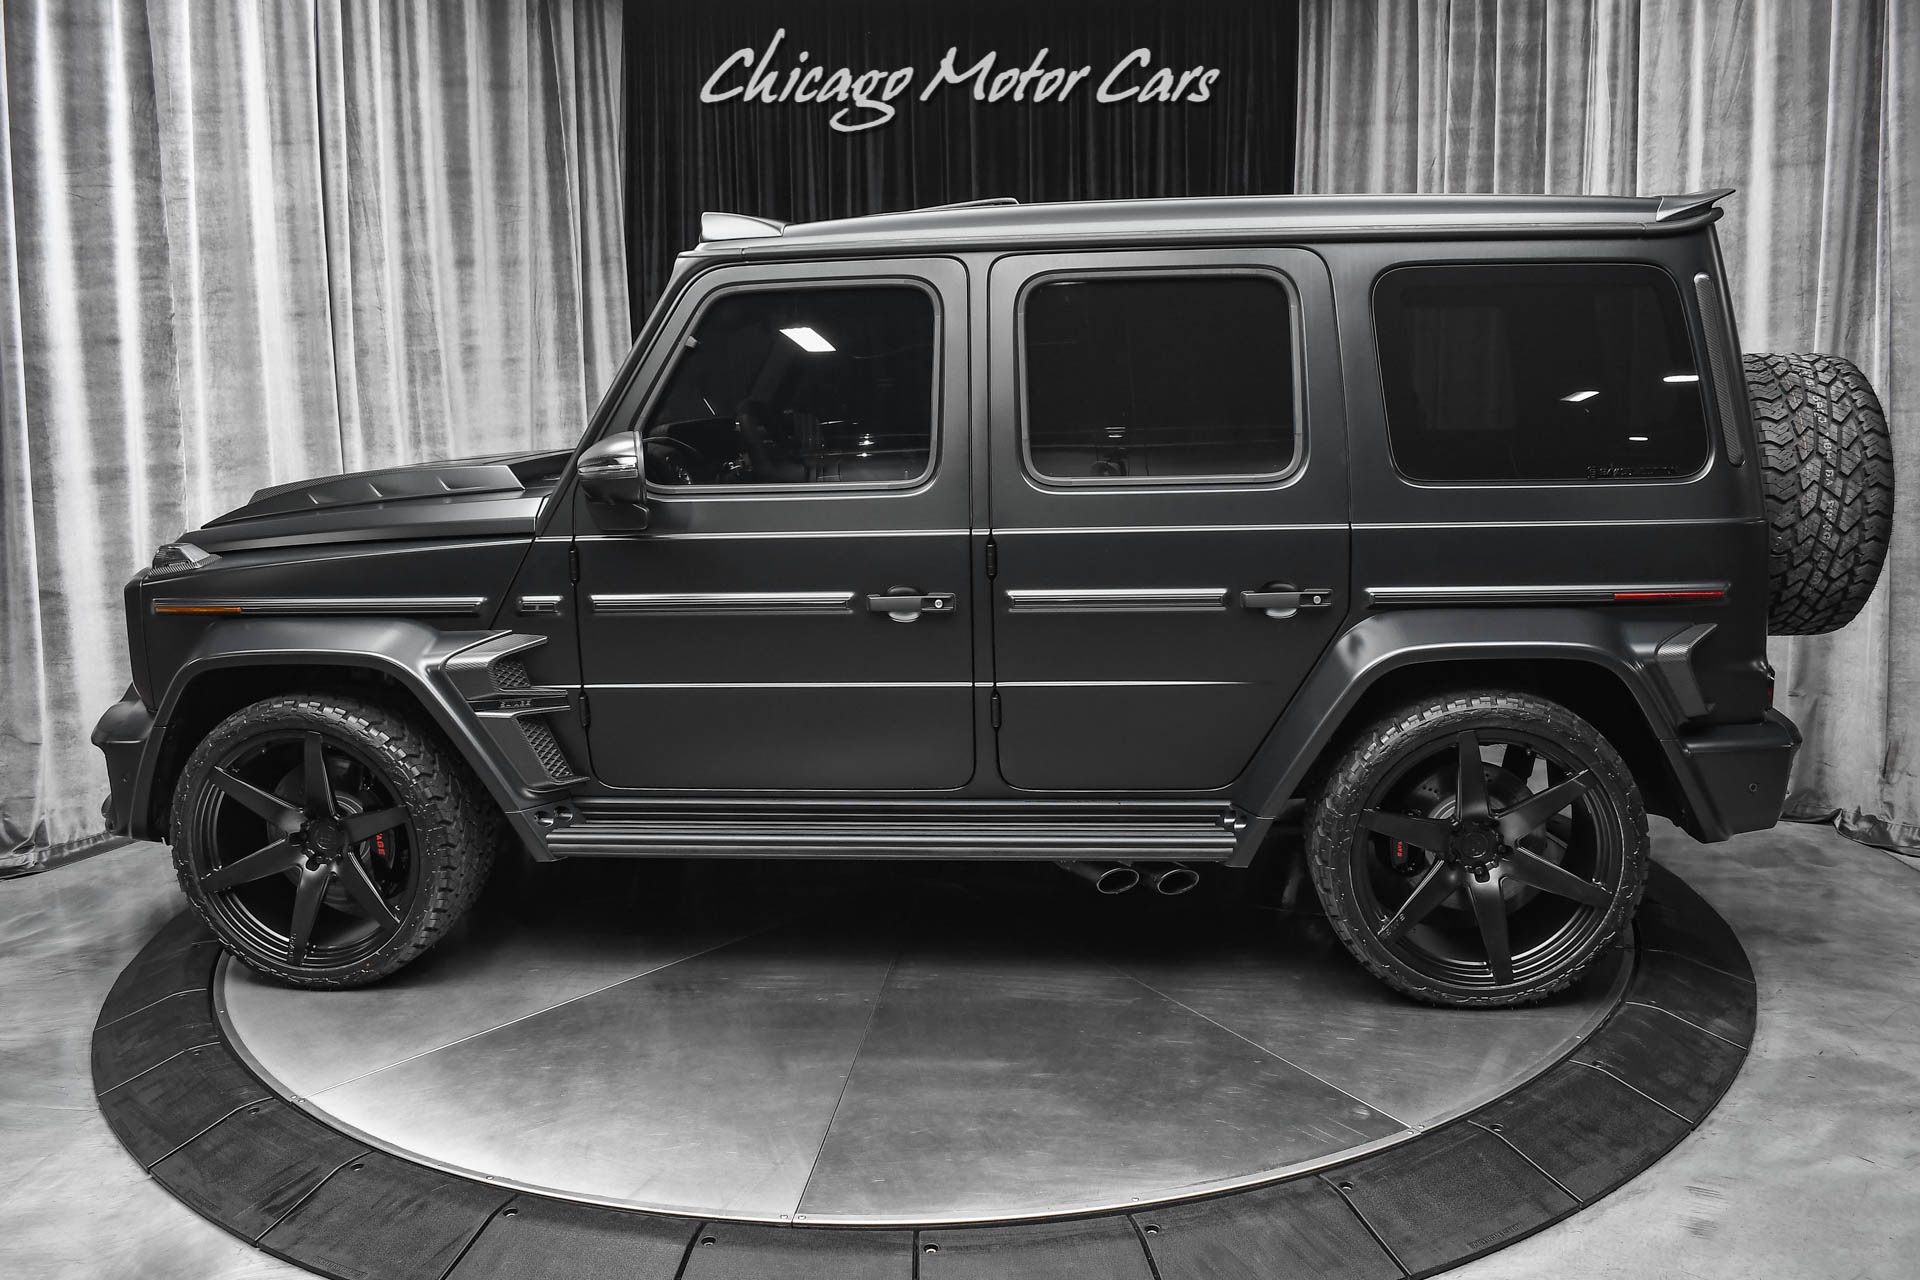 Used-2020-Mercedes-Benz-G63-AMG-4Matic-SUV-BRABUS-WideBody-LOADED-Only-67-Miles-Carbon-Fiber-700HP